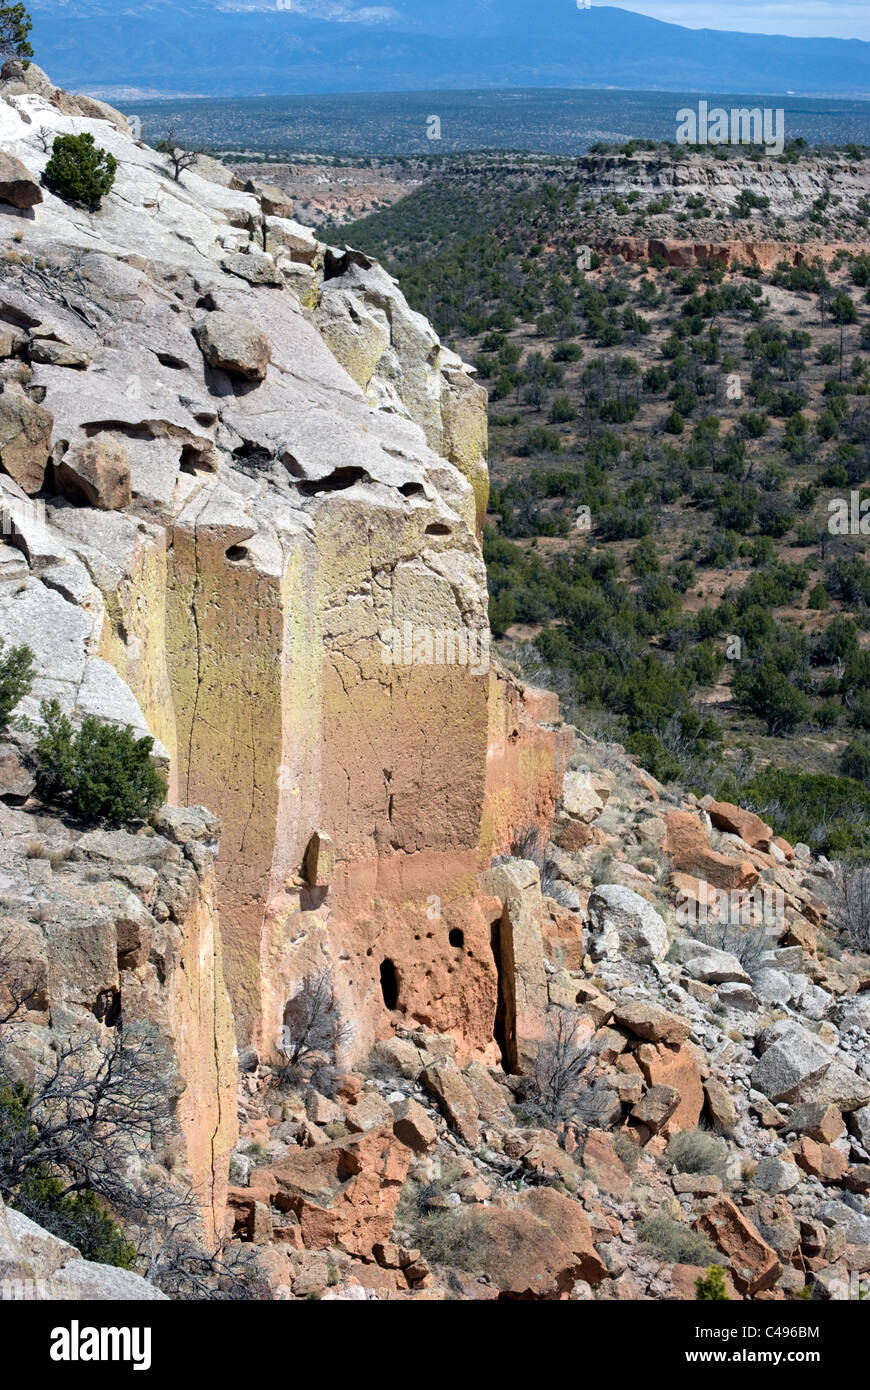 Exposed cliff face revealing Ancestral Pueblo caveates (cliff dwellings) at Tsankawi Pueblo in Bandelier National Monument. Stock Photo